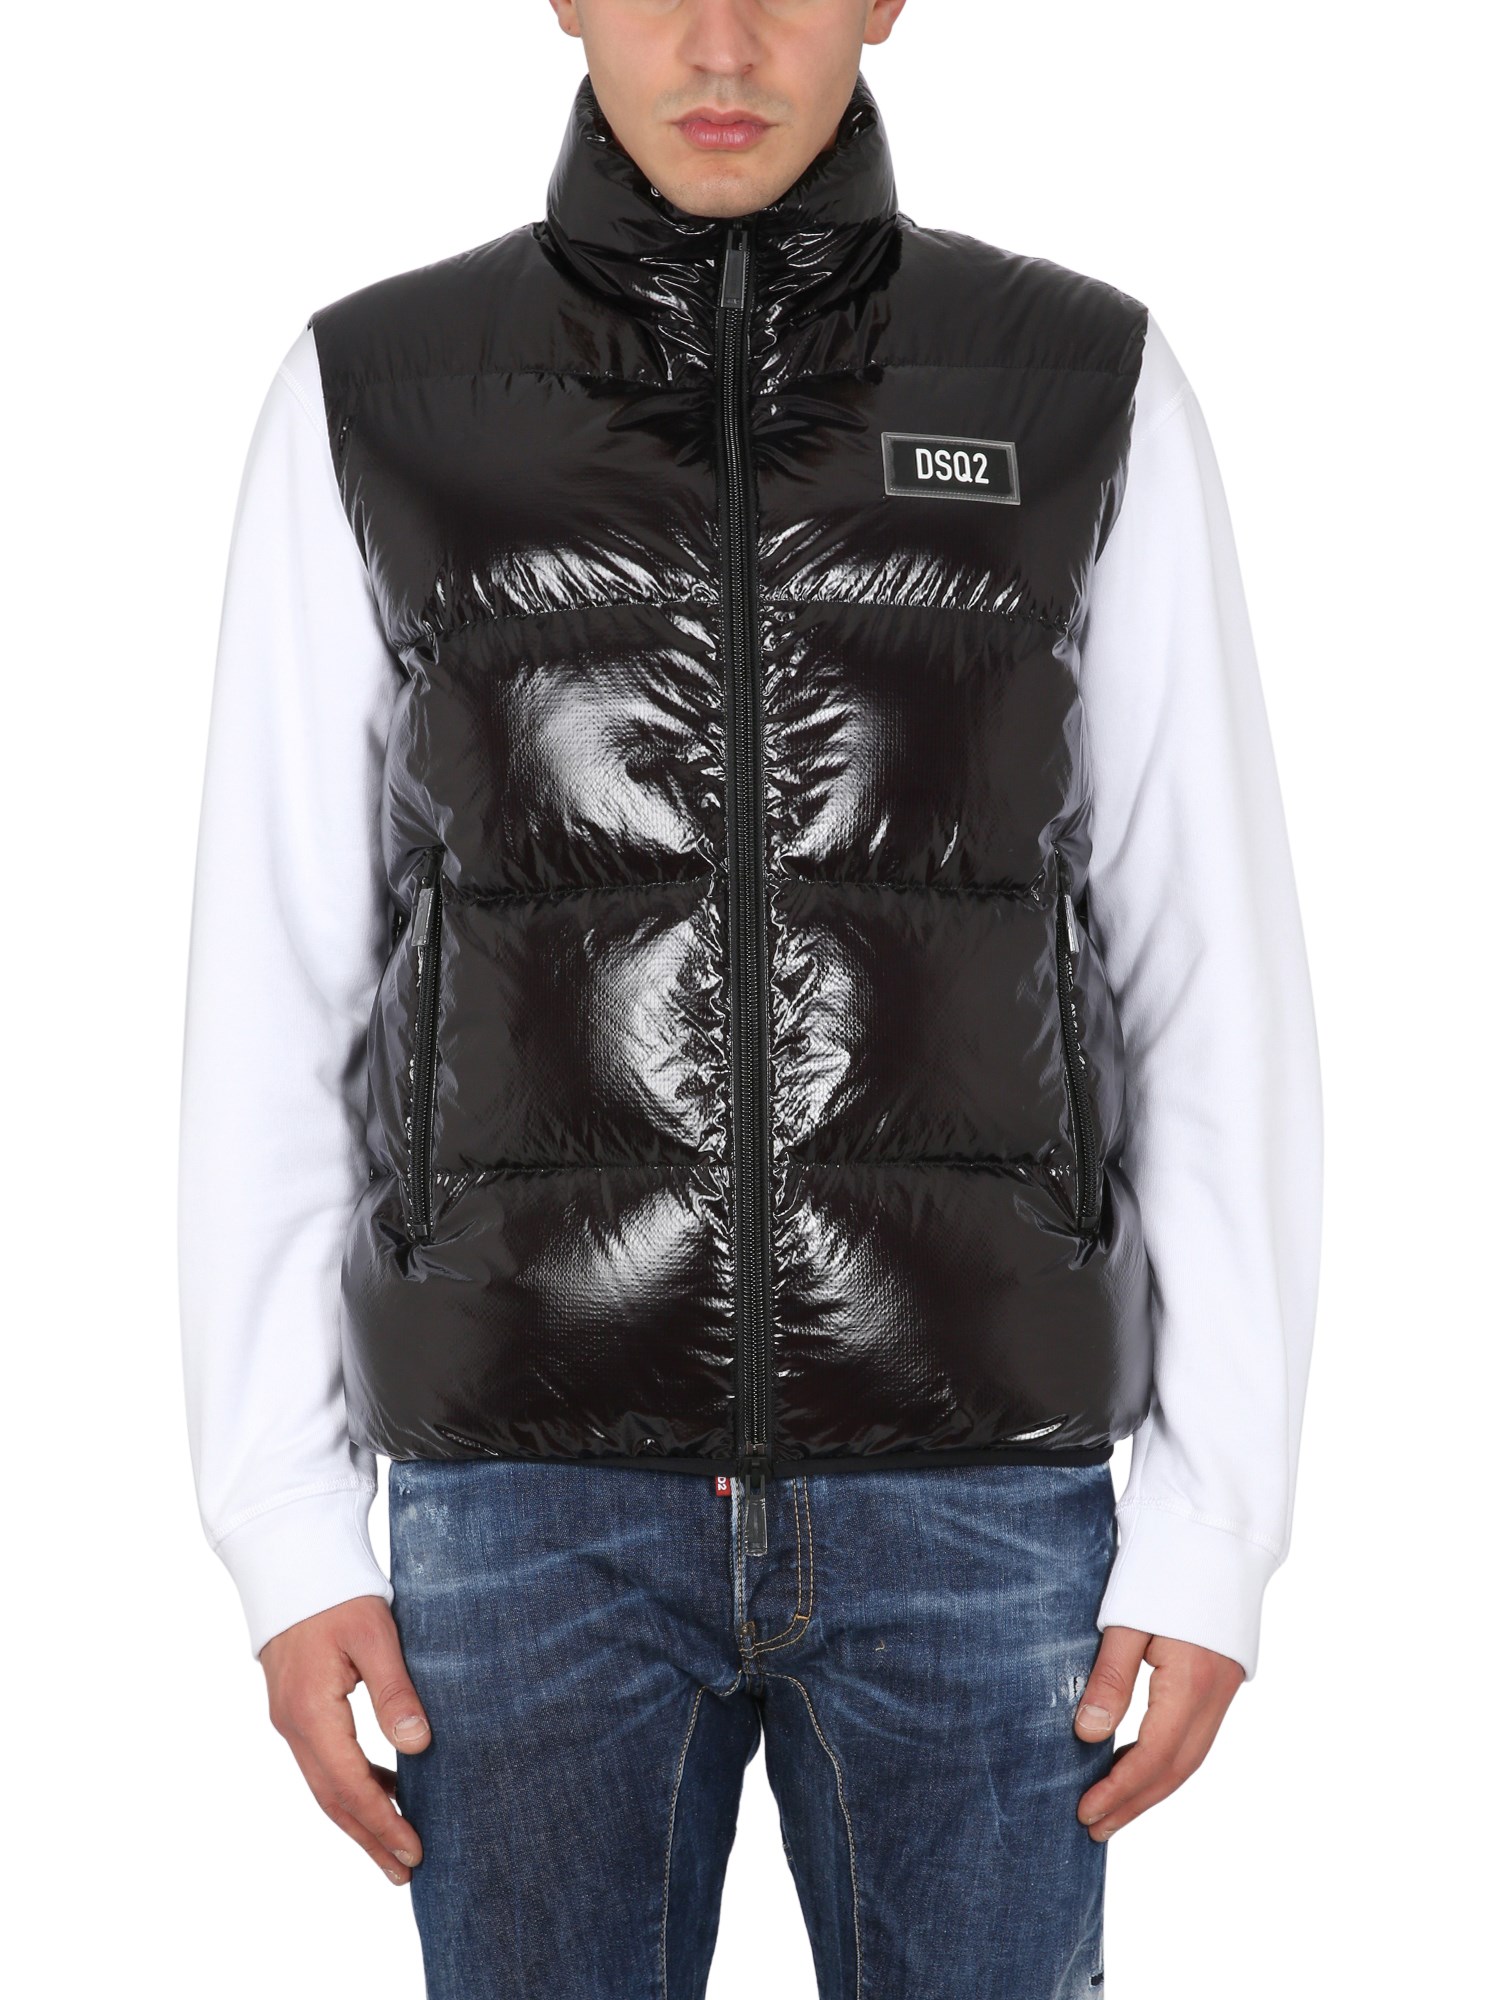 dsquared vests with logo